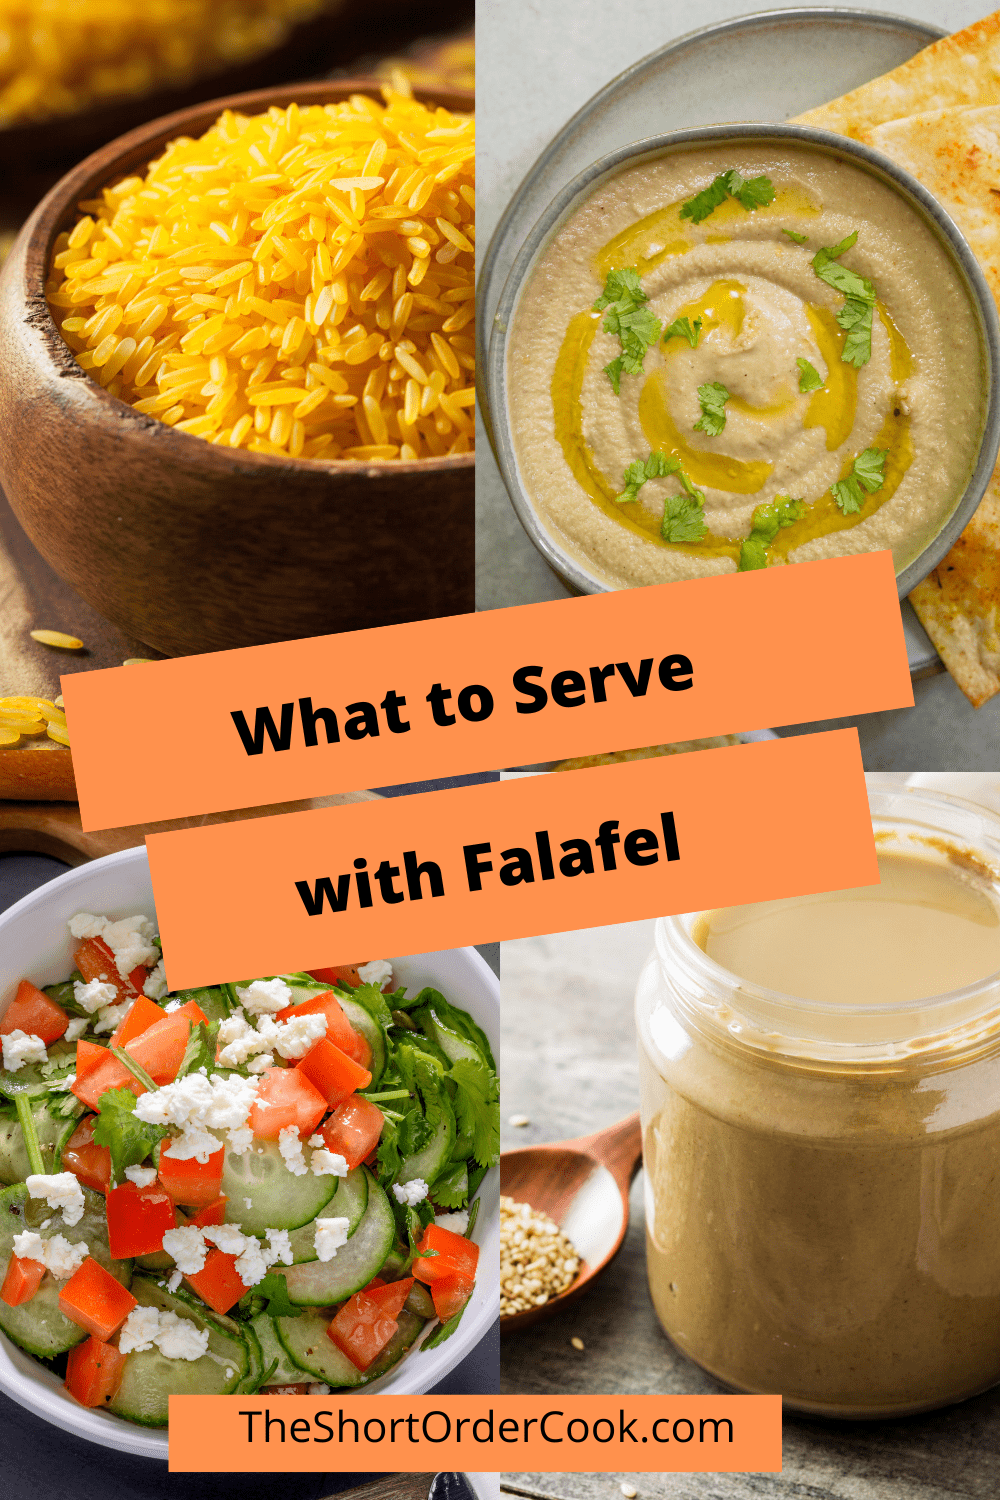 4 recipes for rice, hummus, cucumber salad and tahini to eat with falafel.